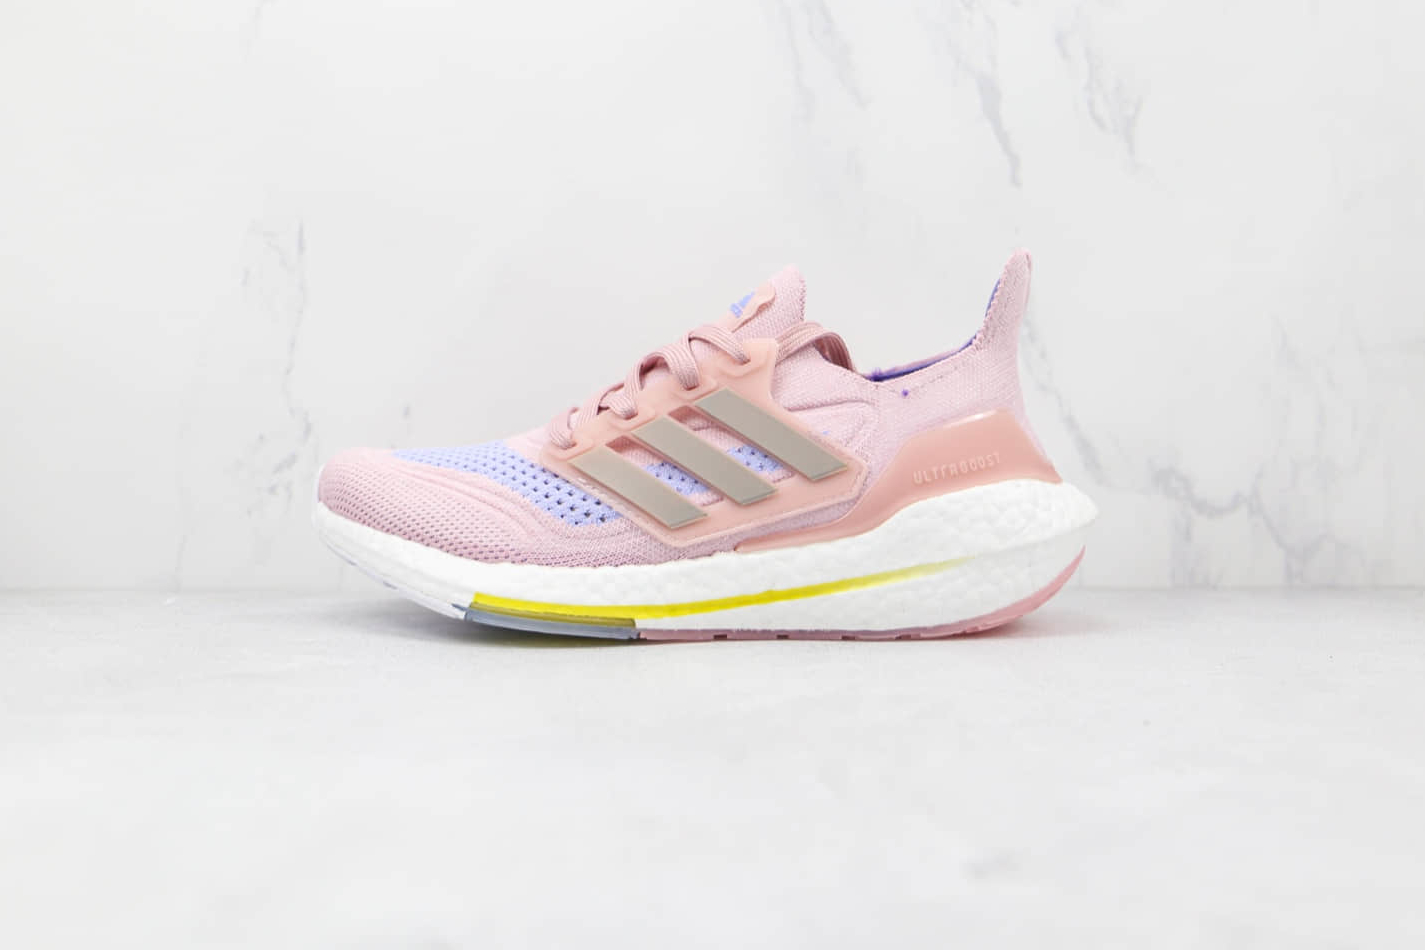 Adidas Ultraboost 21 Pink S23837 - Non-Slip Low Tops, Wear-Resistant (80 characters)